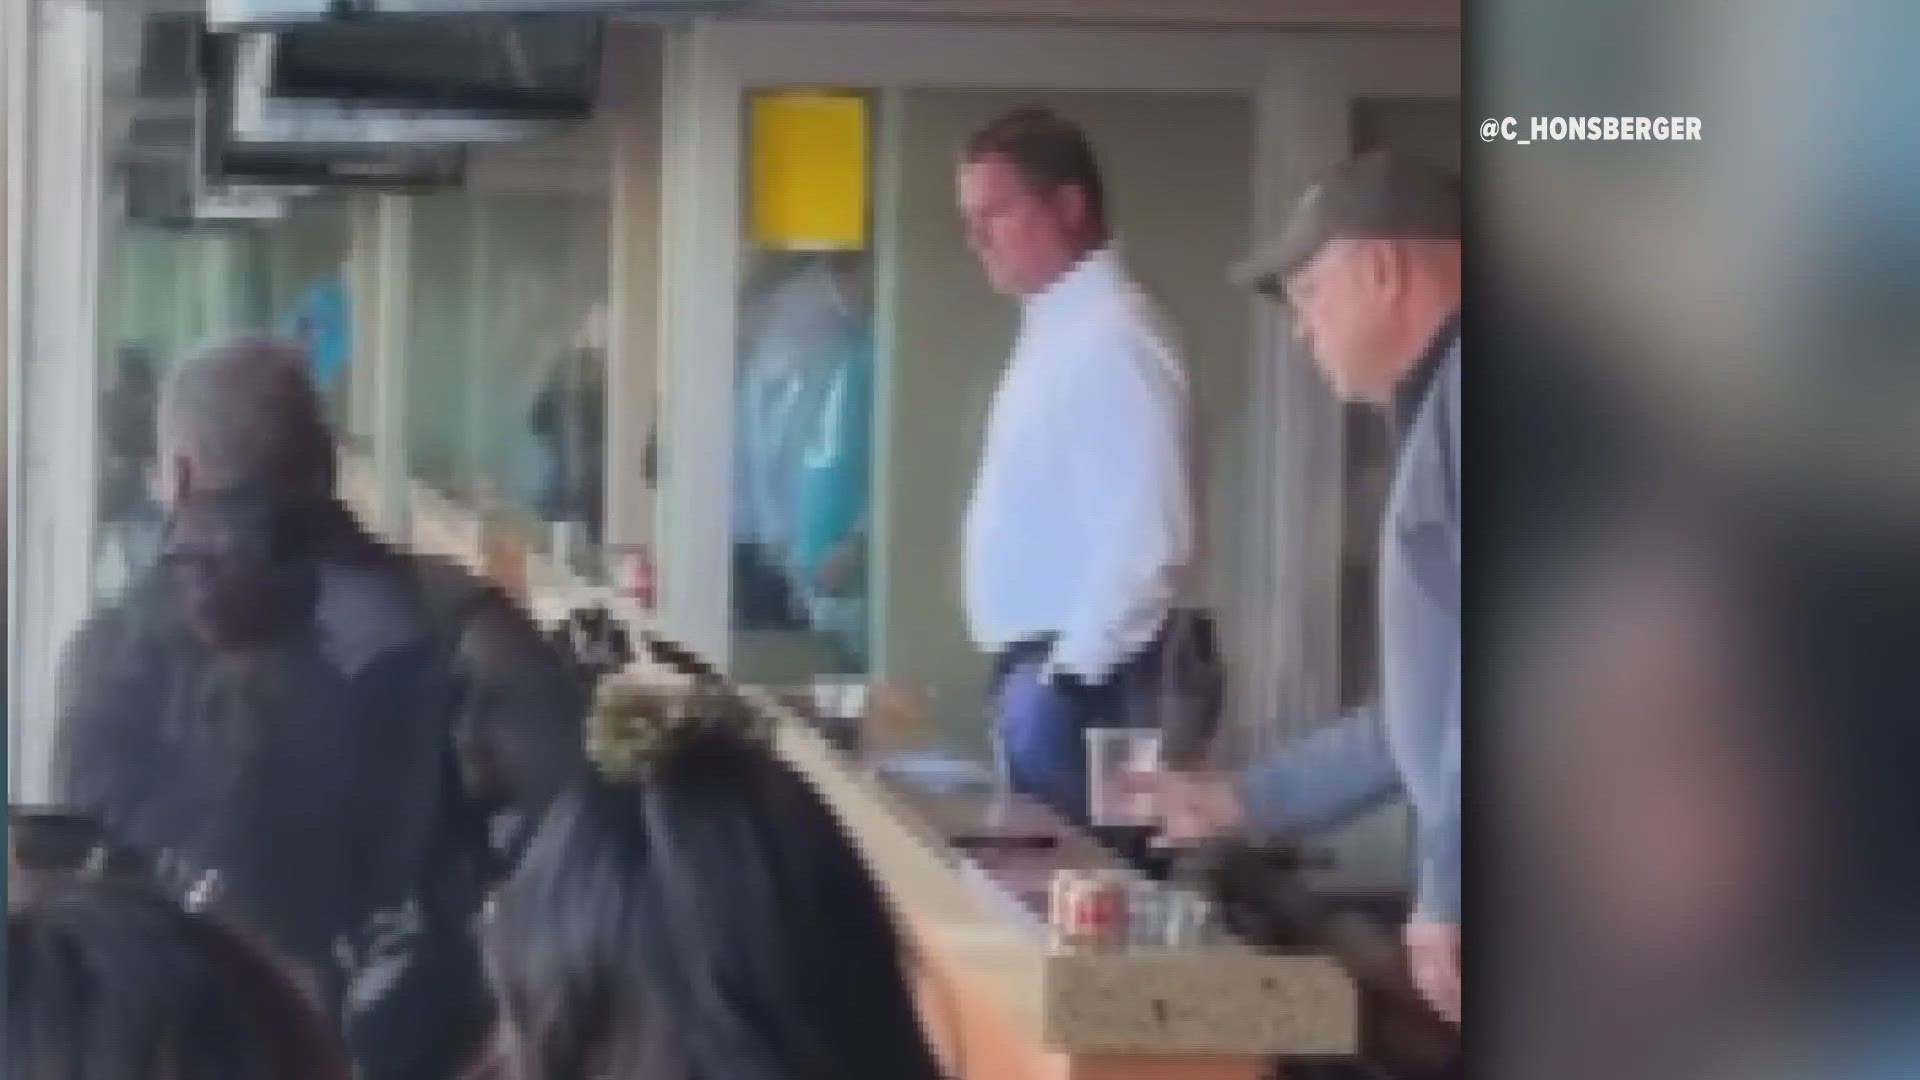 The Carolina Panthers owner was visibly upset during his team's 26-0 loss.